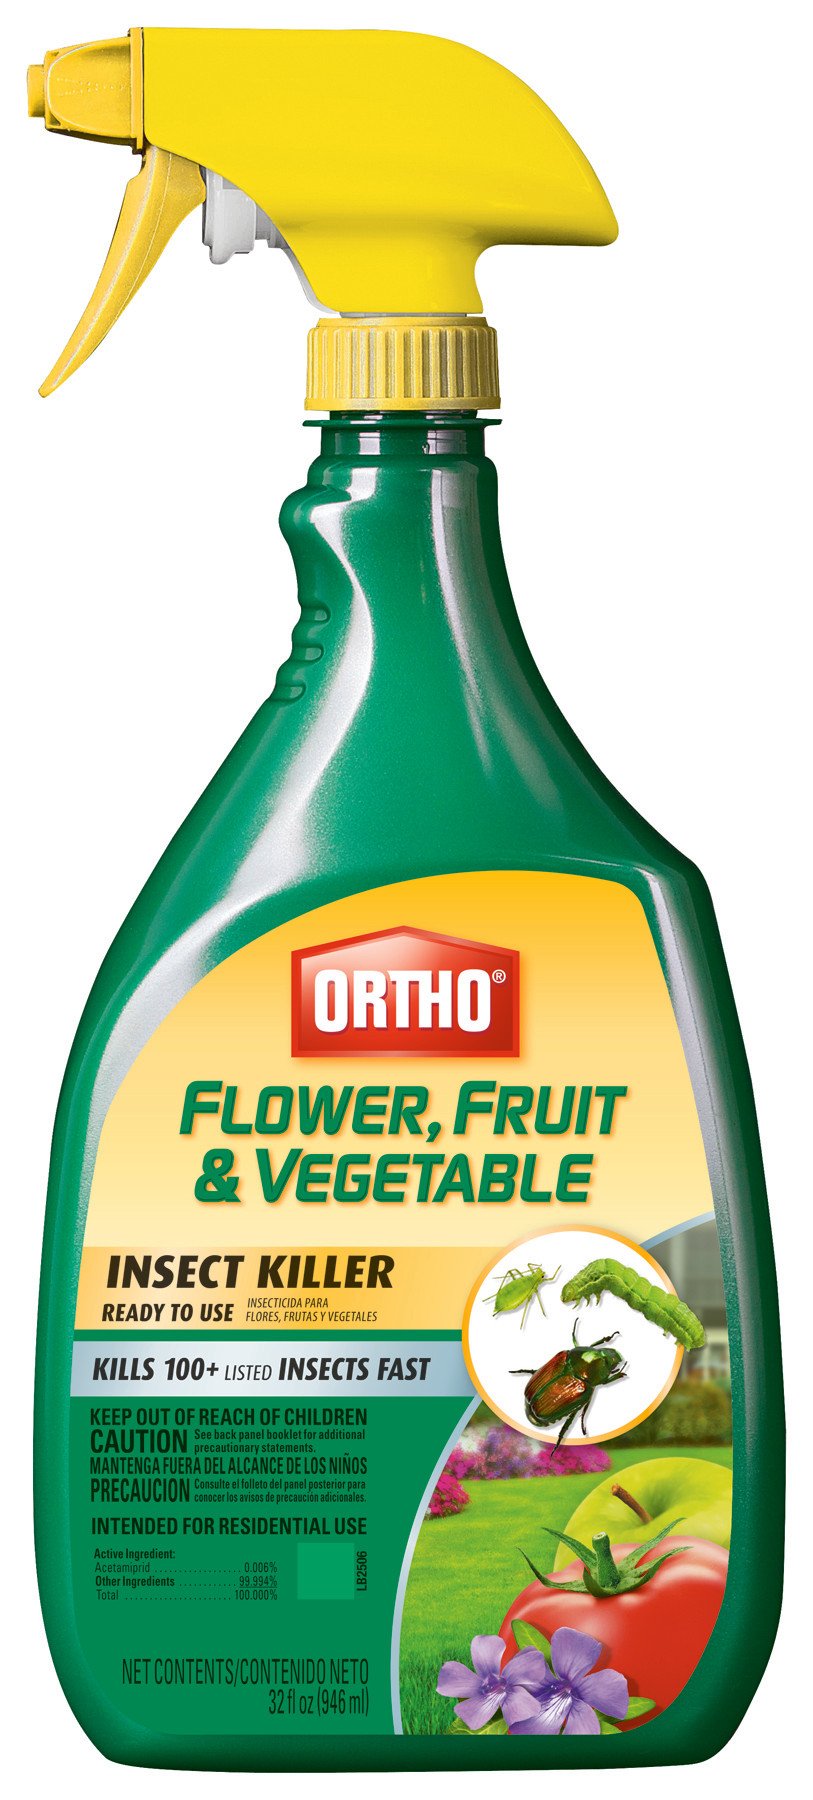 Ortho 0331320 Flower, Fruit and Vegetable Insect Killer, 32-Ounce (Garden Insecticide) (Discontinued by Manufacturer)